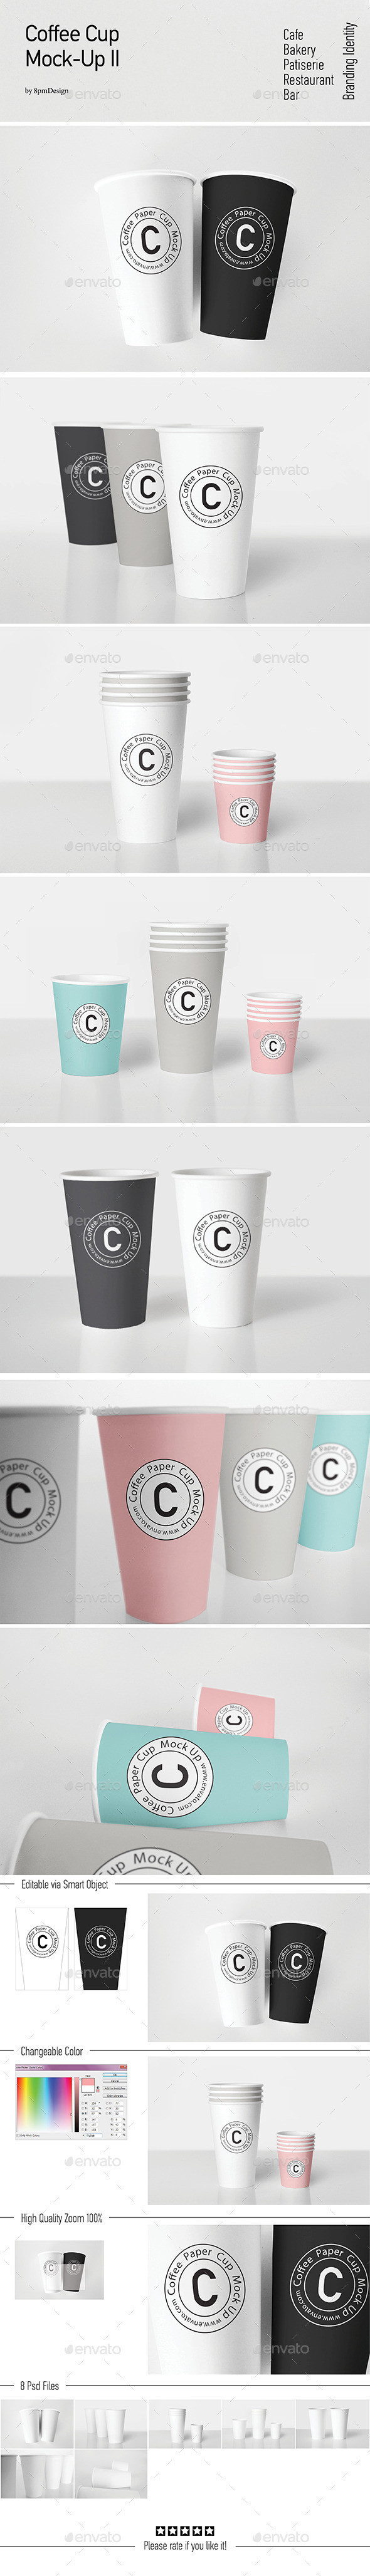 Coffee 20cup 20mock up 20ii image 20preview